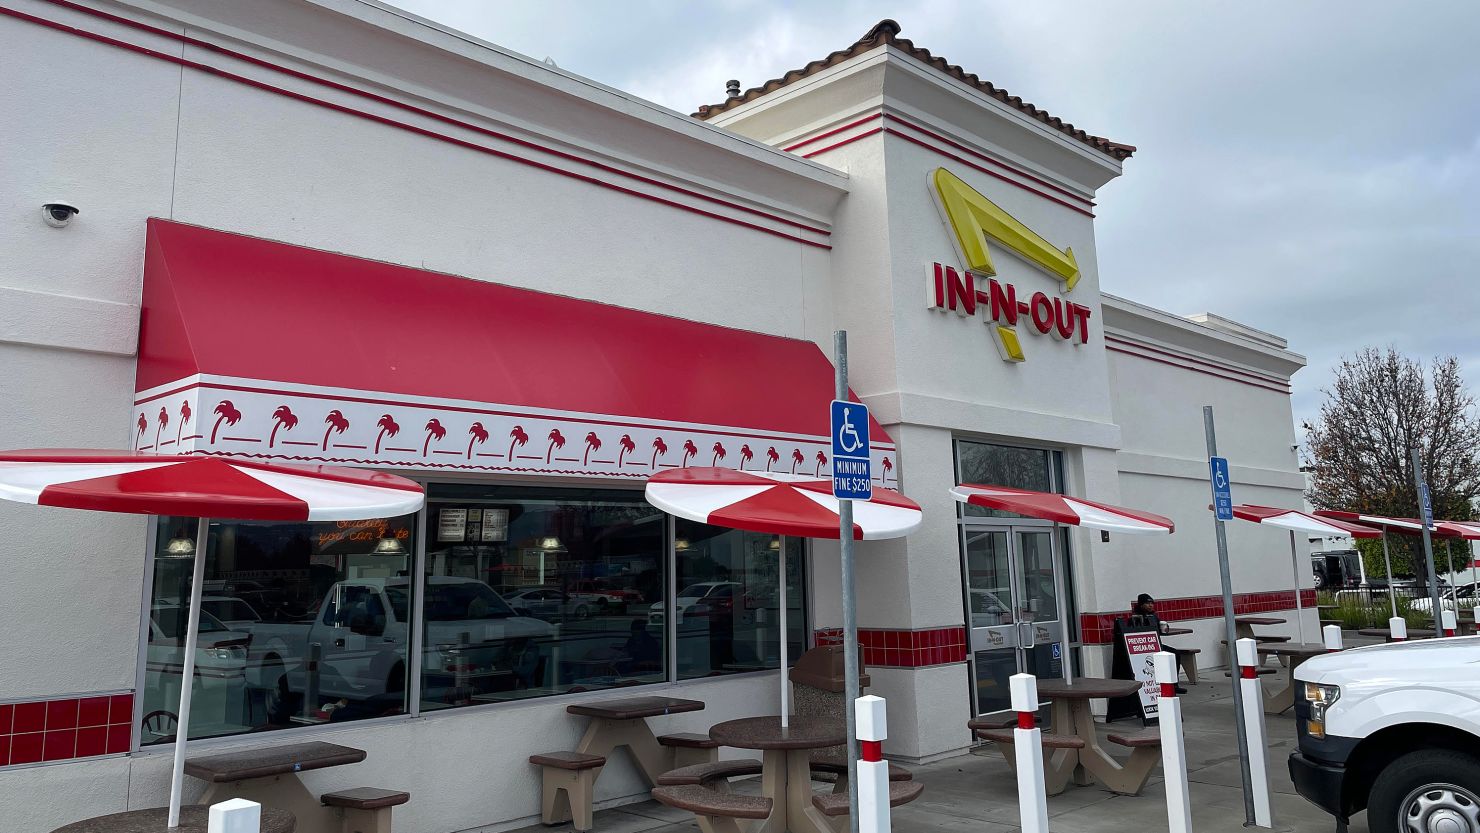 OAKLAND, CALIFORNIA - JANUARY 23: An exterior view of an In-N-Out Burger restaurant on January 23, 2024 in Oakland, California. Fast food chain In-N-Out Burger is closing one of its profitable restaurants due to high crime in the area, like car break-ins and armed robbery, which is making it unsafe for customers and workers. (Photo by Justin Sullivan/Getty Images)